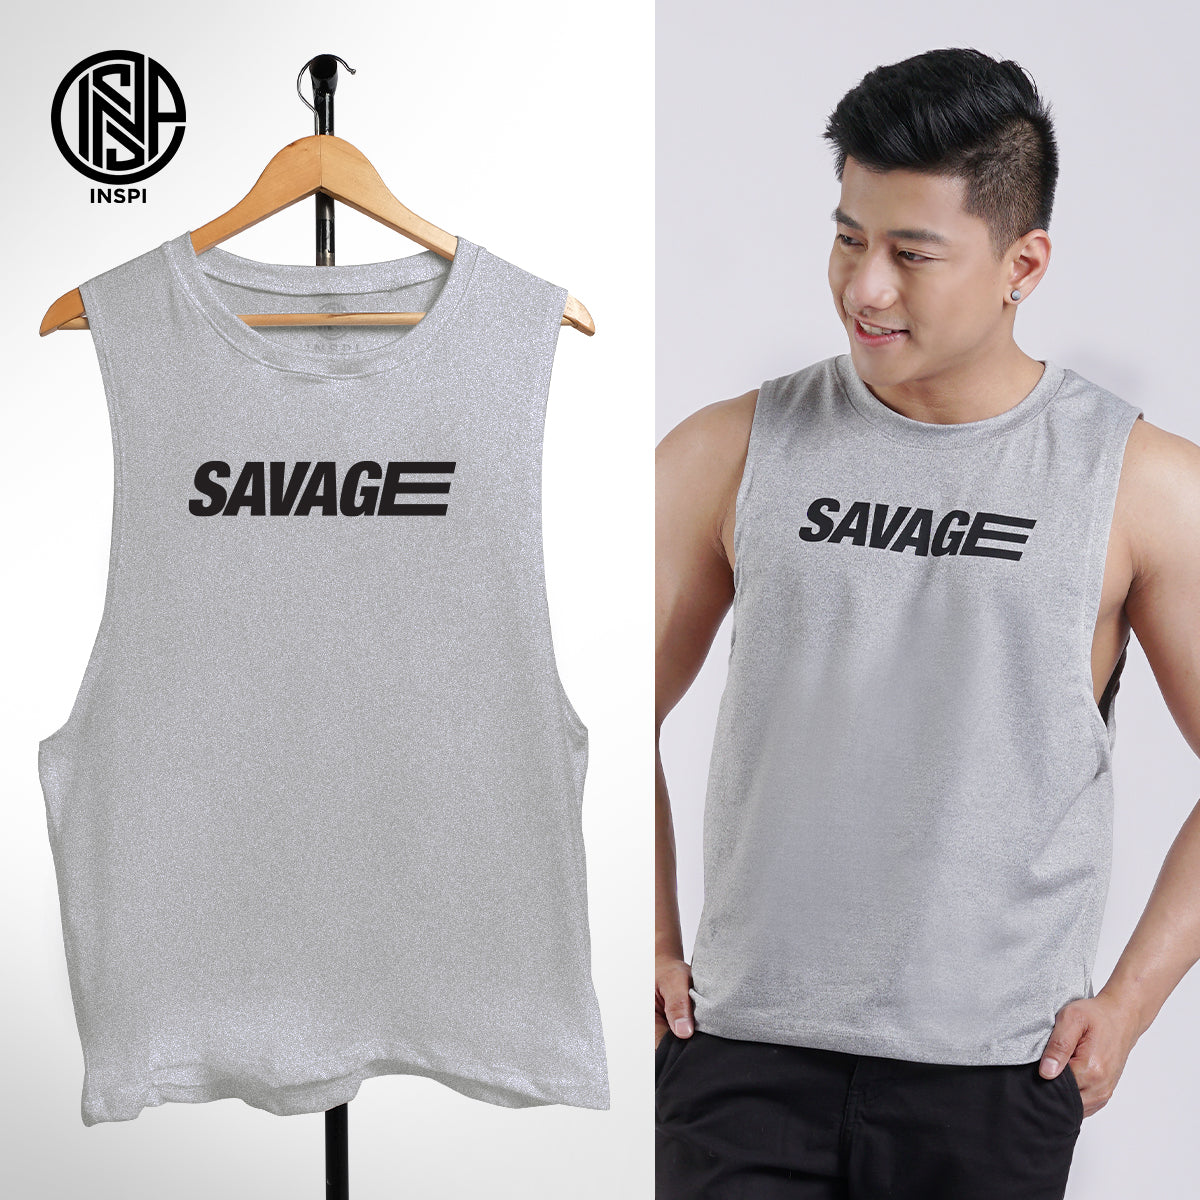 INSPI x Vrix Muscle Tee For Men Printed Sleeveless Tank Top Sando Minimalist Inspired Activewear Mens Gym Clothes